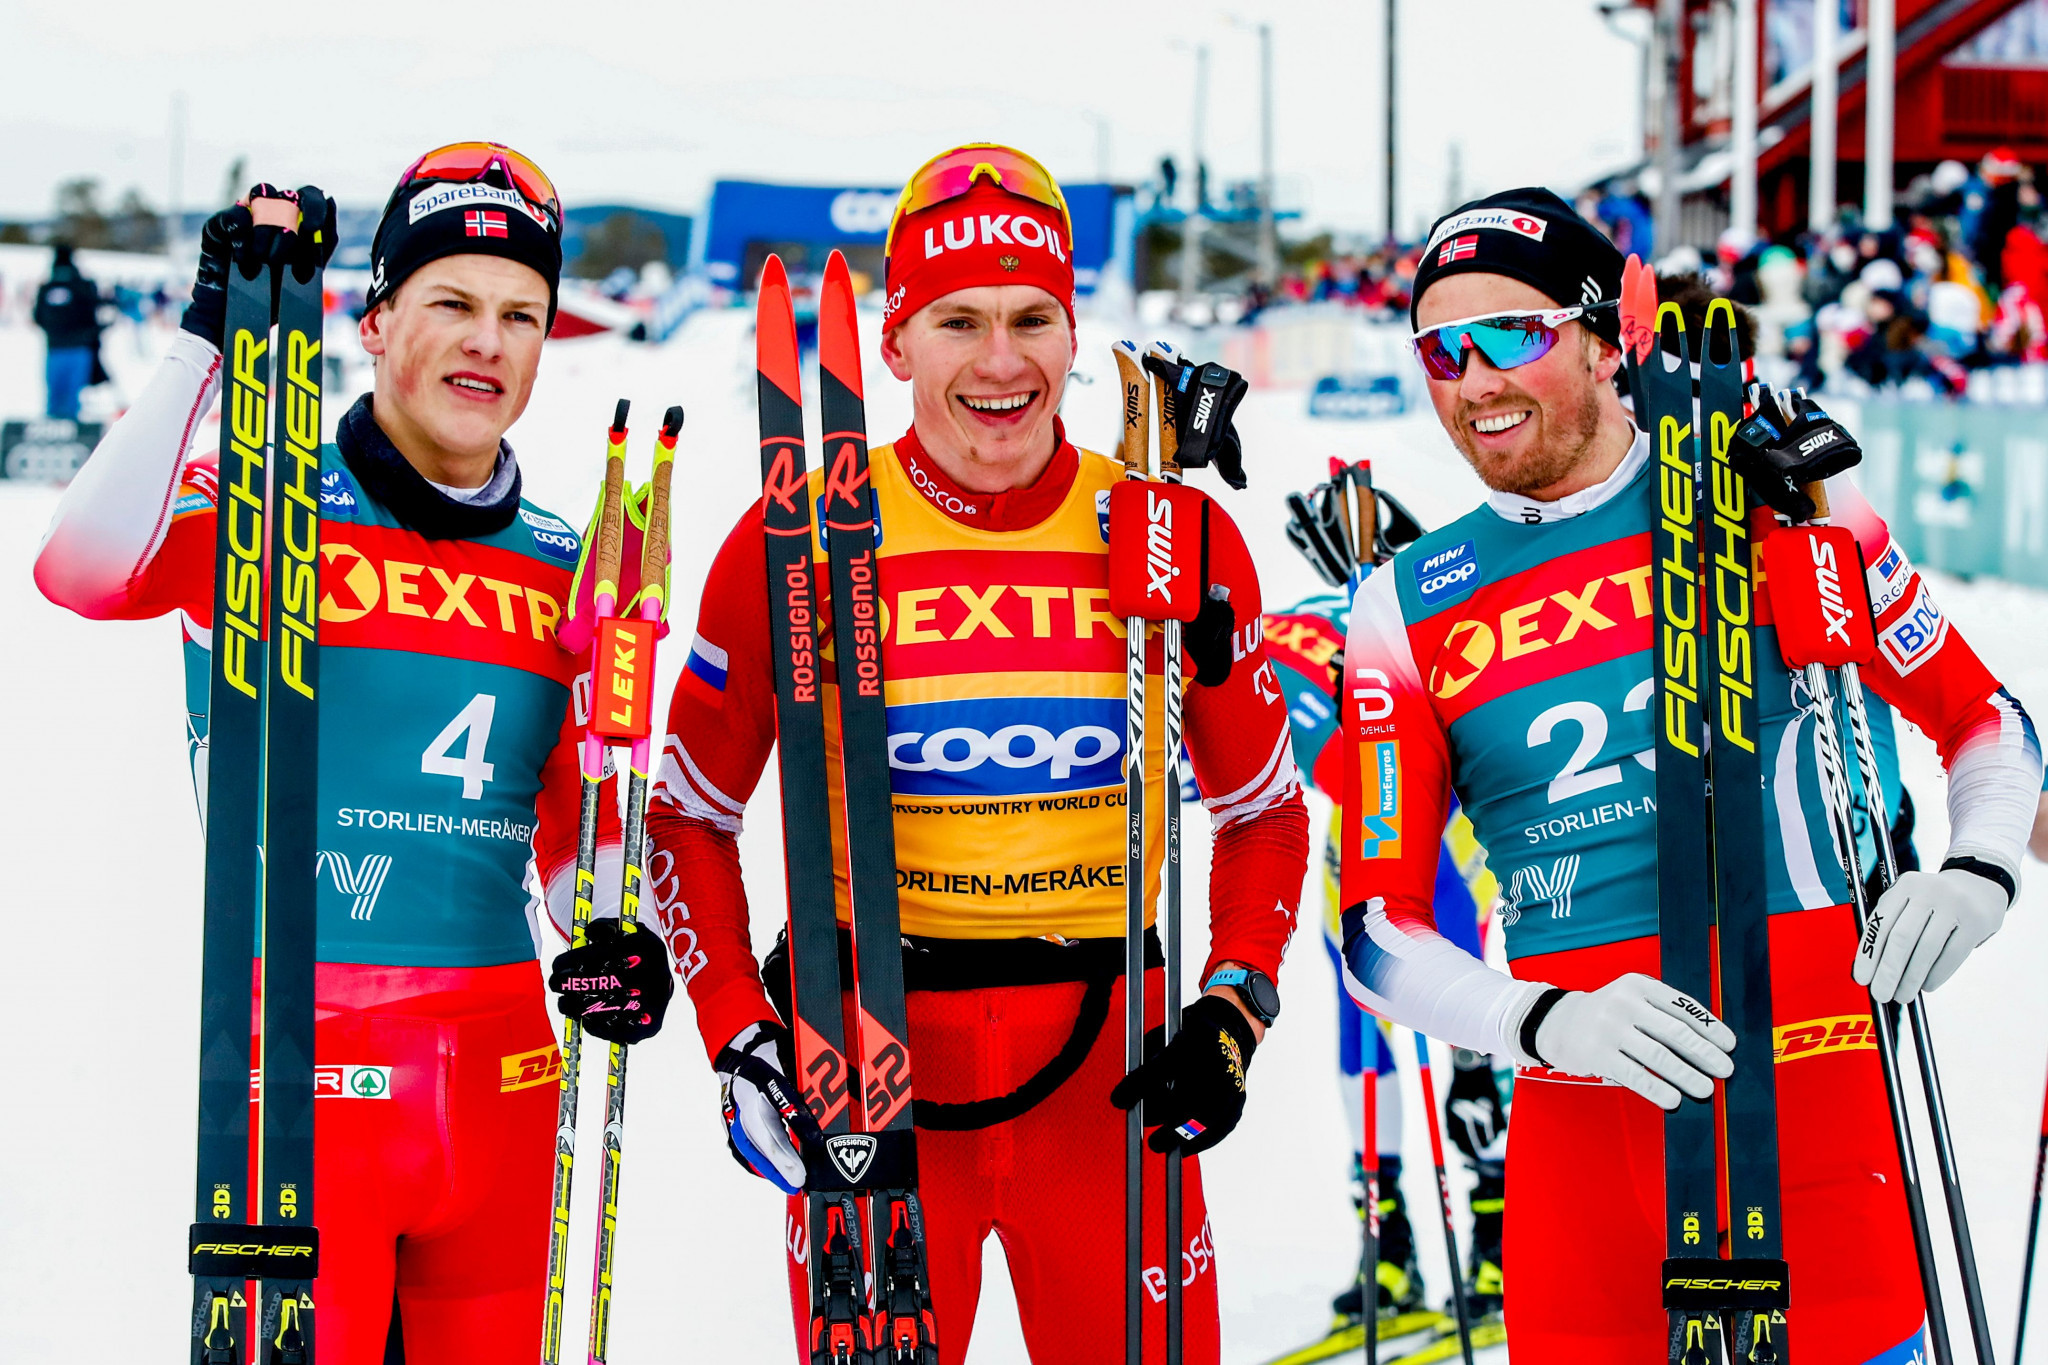 Russia's Alexander Bolshunov, centre, retained his lead at the top of the FIS Cross-Country World Cup finishing ahead of Norway's Johannes Høsflot Klæbo, left, and Emil Iversen, right  ©Getty Images